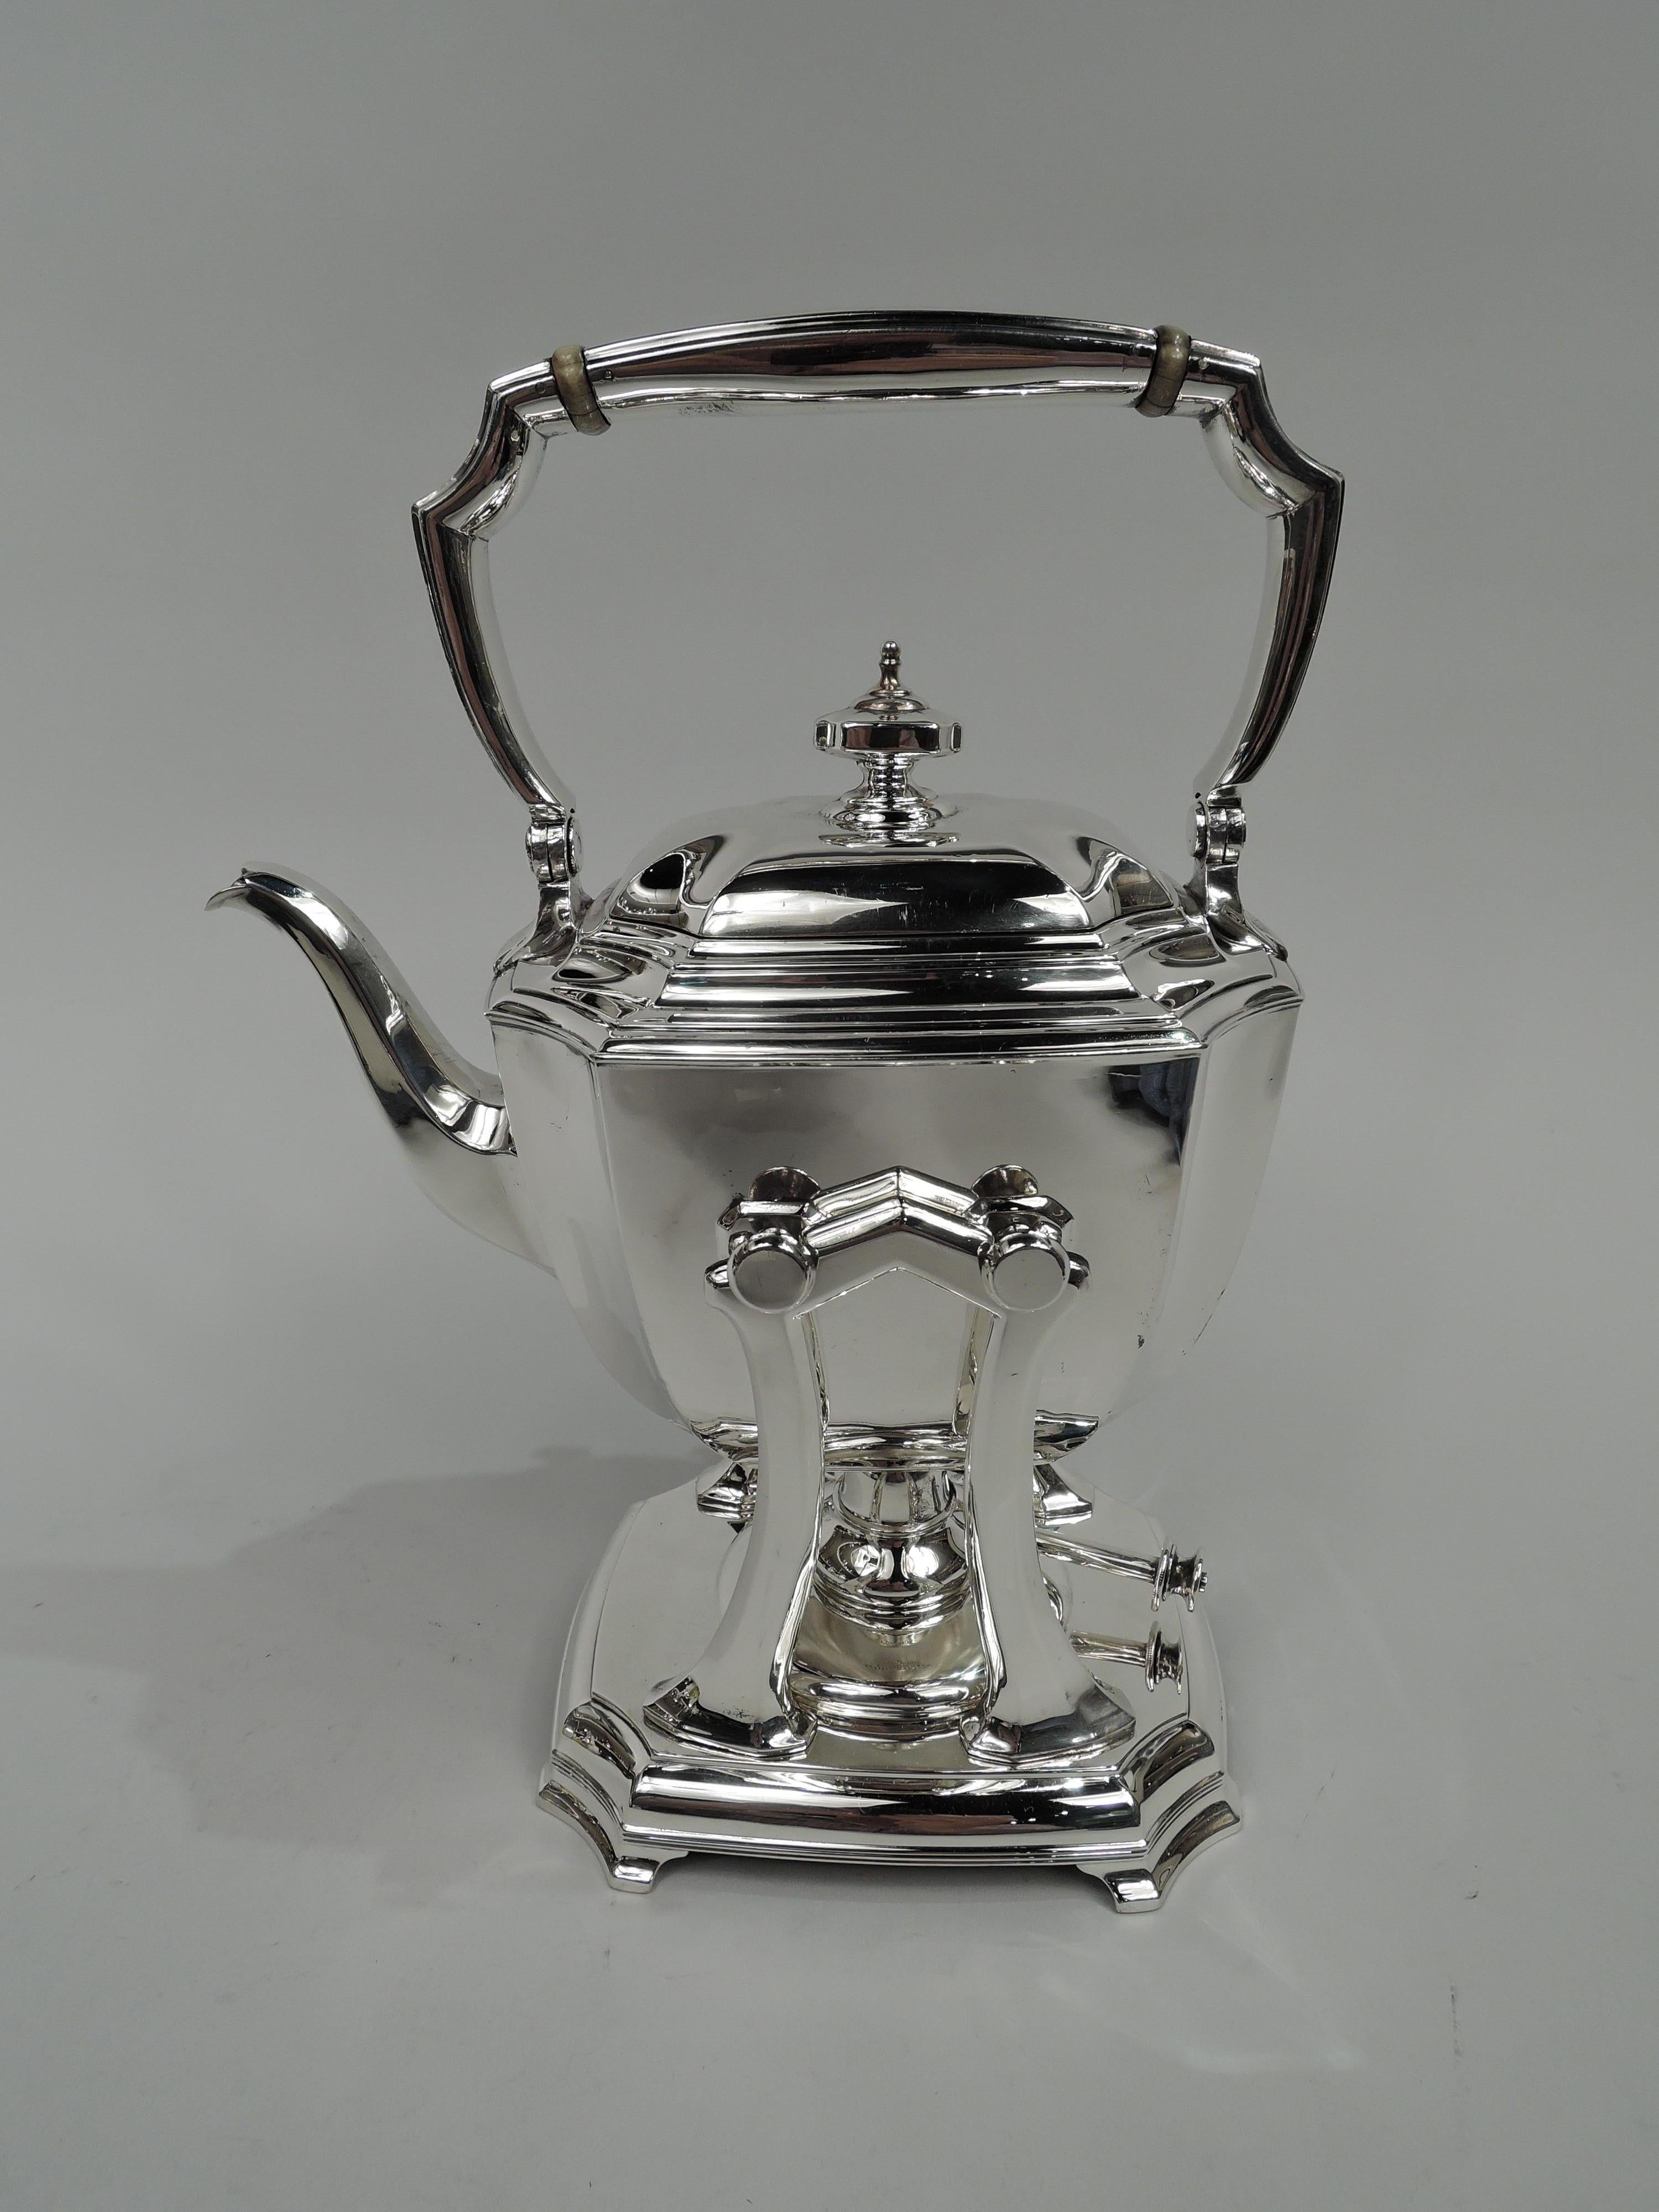 Hampton sterling silver coffee and tea set on tray. Made by Tiffany & Co. in New York, ca 1930. This set comprises 7 pieces: Hot water kettle on stand, coffeepot, teapot, creamer, sugar, and waste bowl on tray.

Rectilinear with gently curved